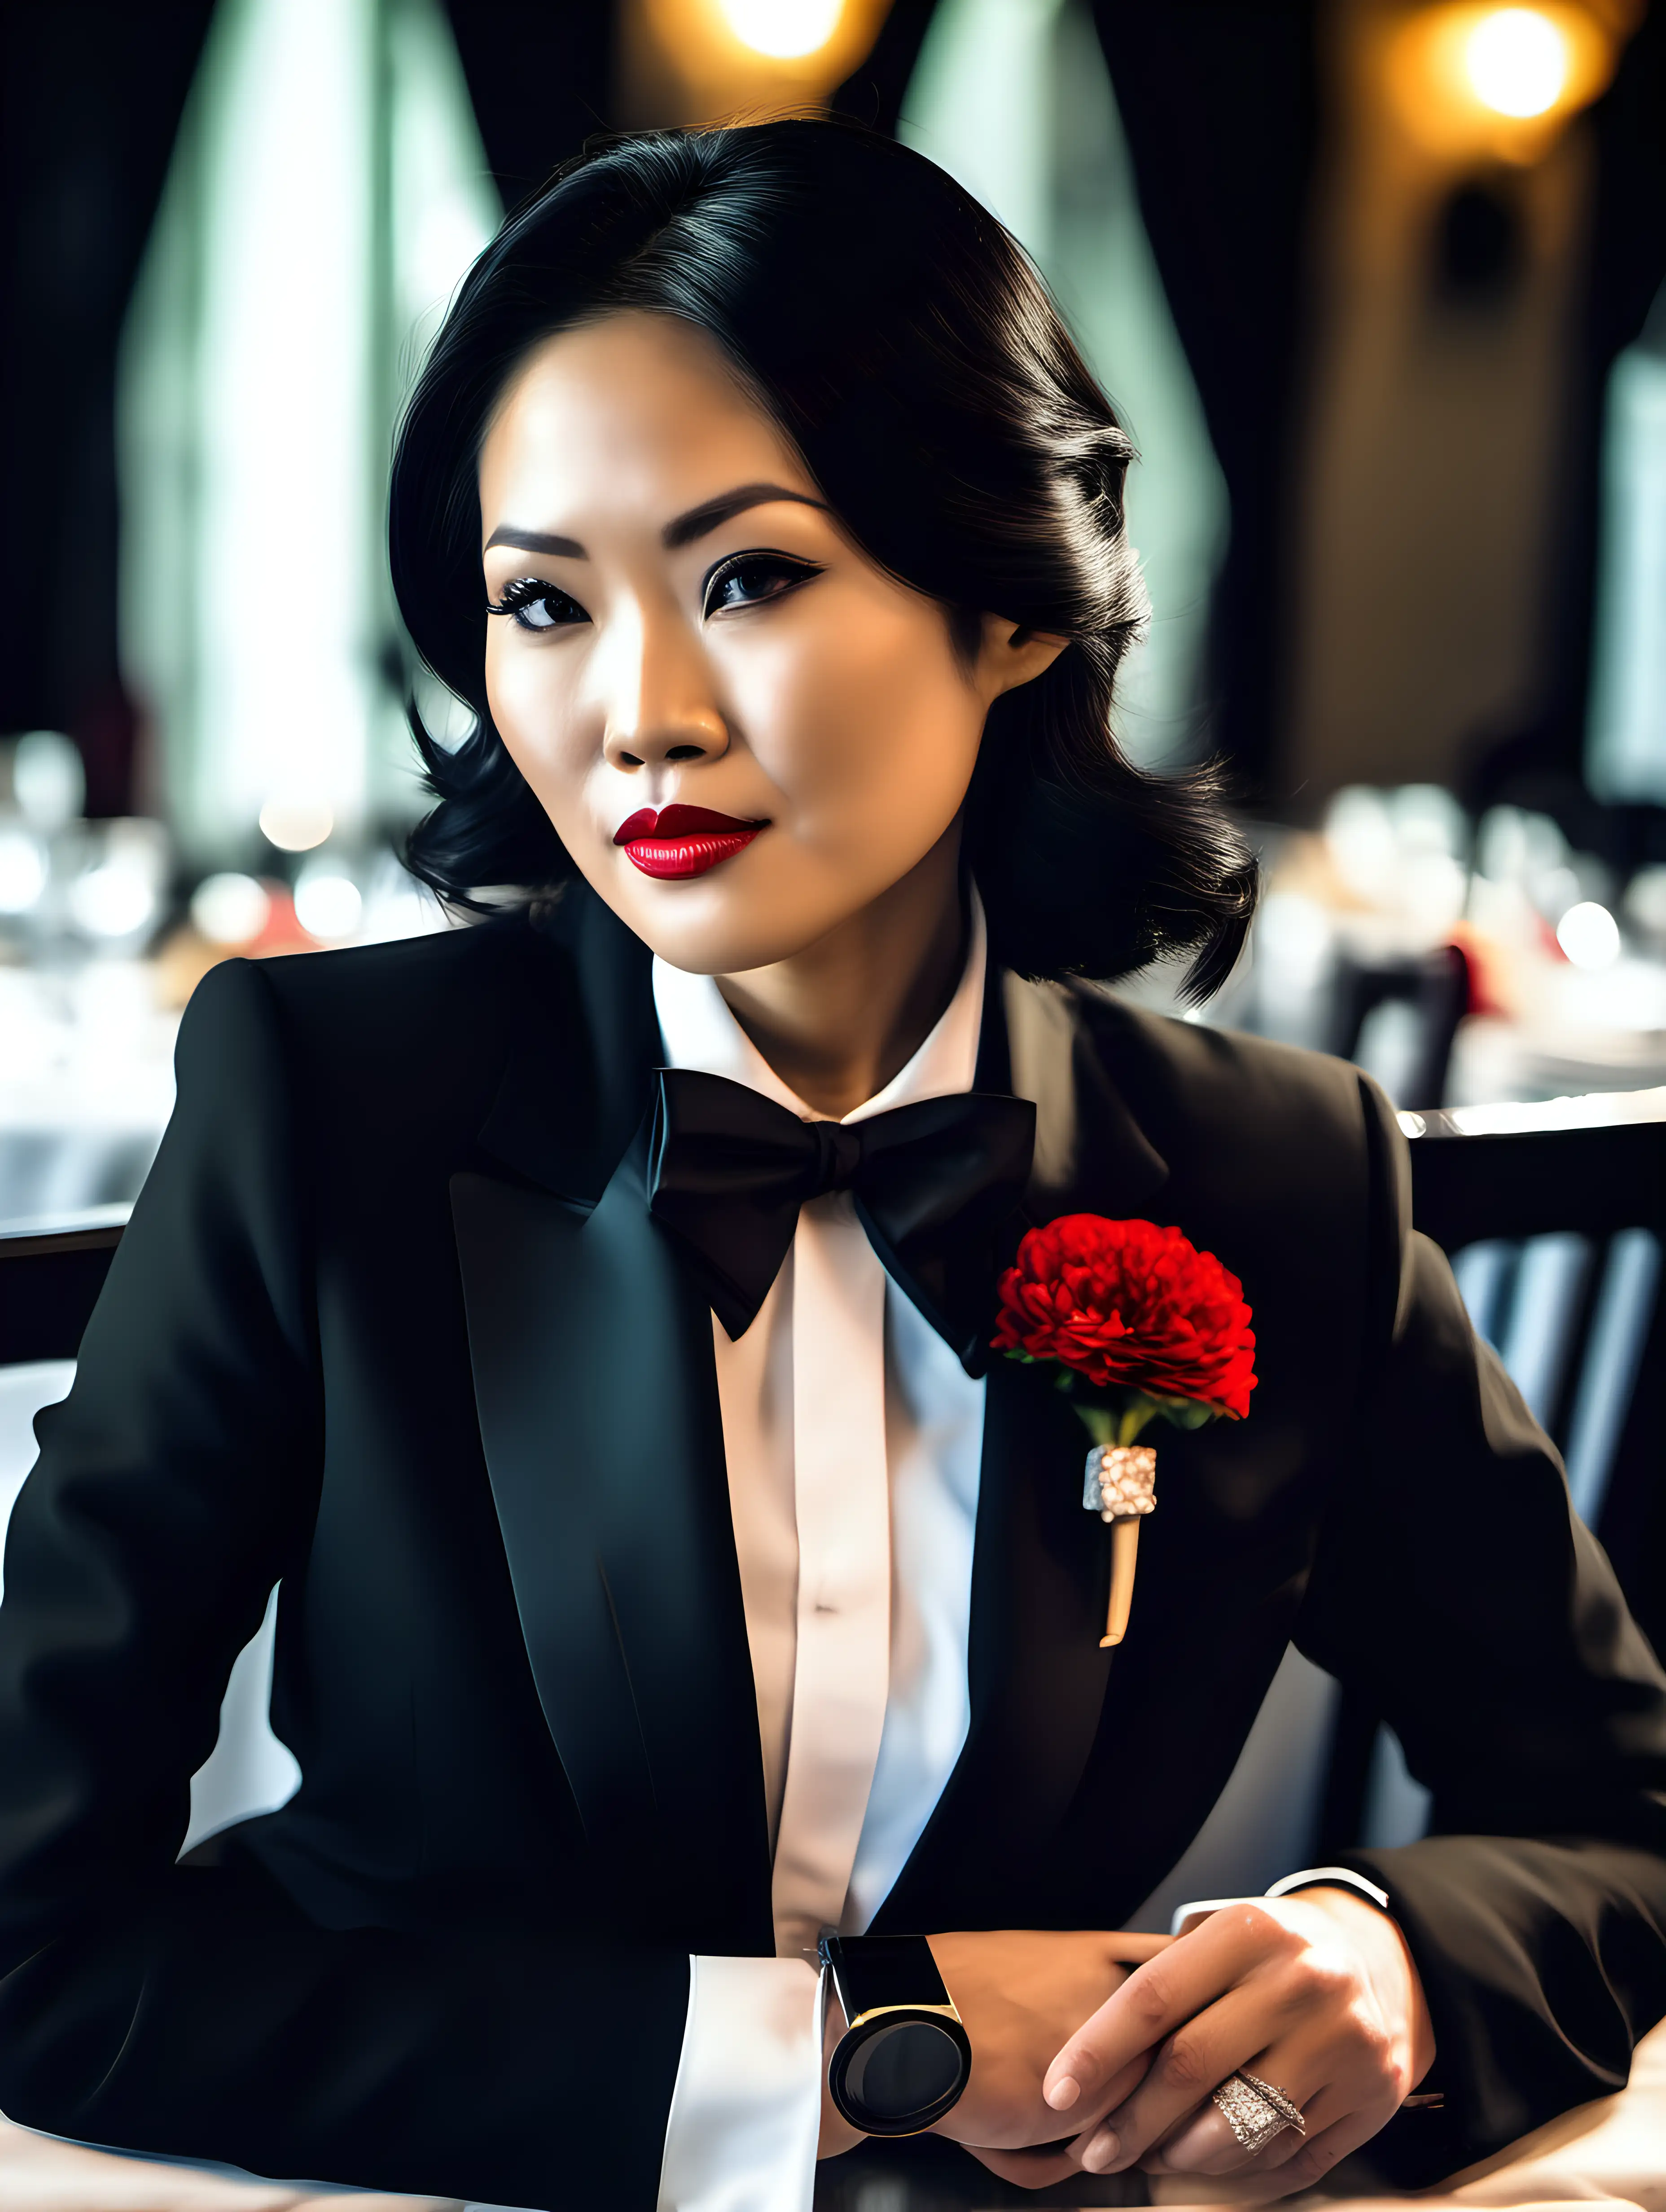 30 year old attractive Vietnamese woman with black shoulder length hair and red lipstick, wearing a formal tuxedo with a black bow tie and large black cufflinks. Her jacket has a corsage. She is seated at a dining table.